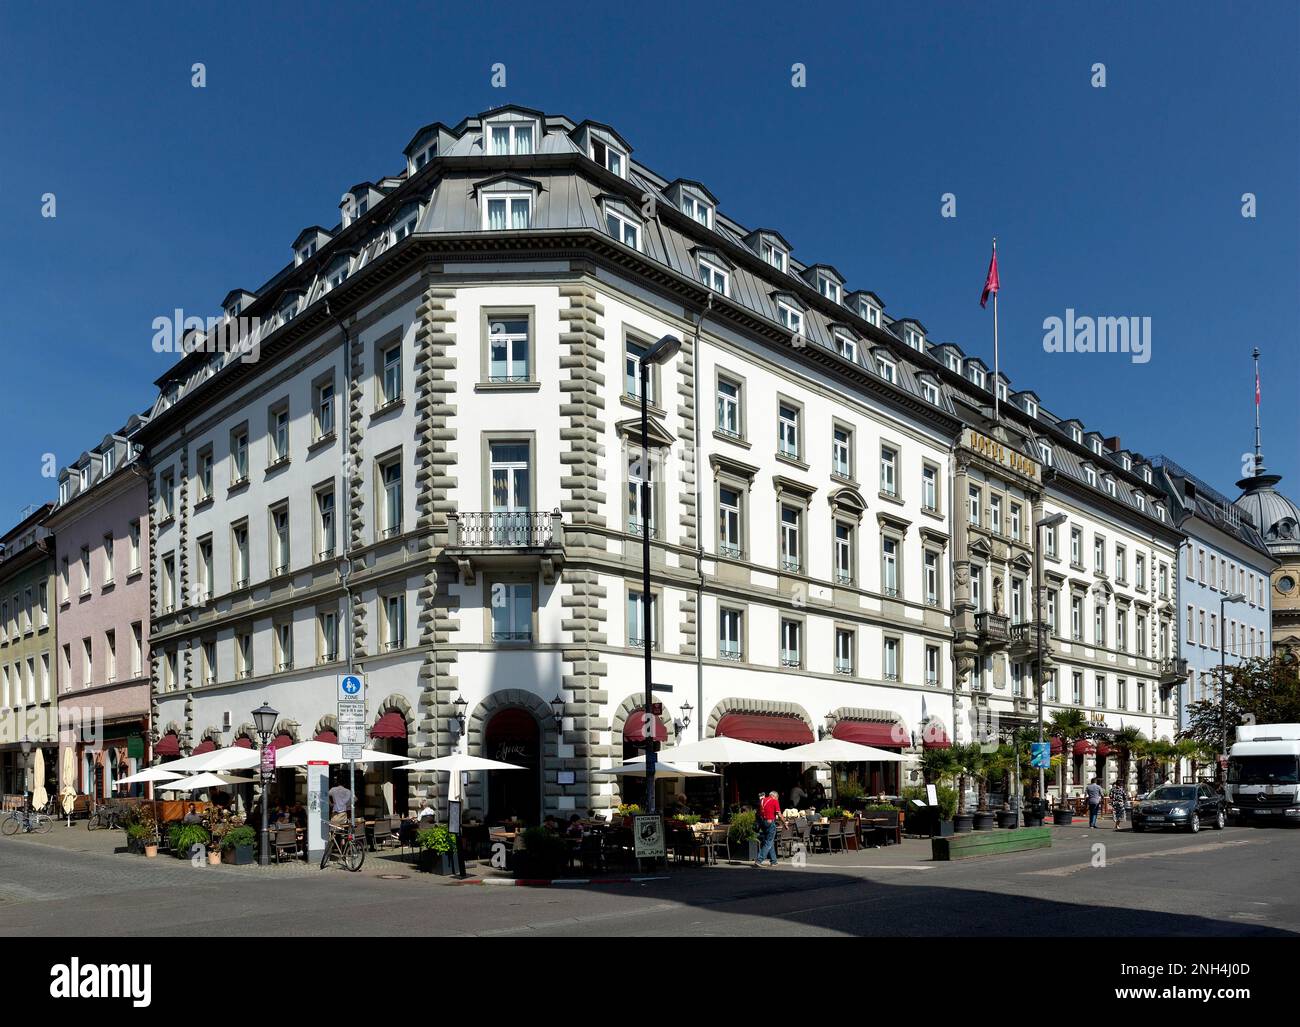 Hotel Halm, Constance, Baden-Wuerttemberg, Germany Stock Photo